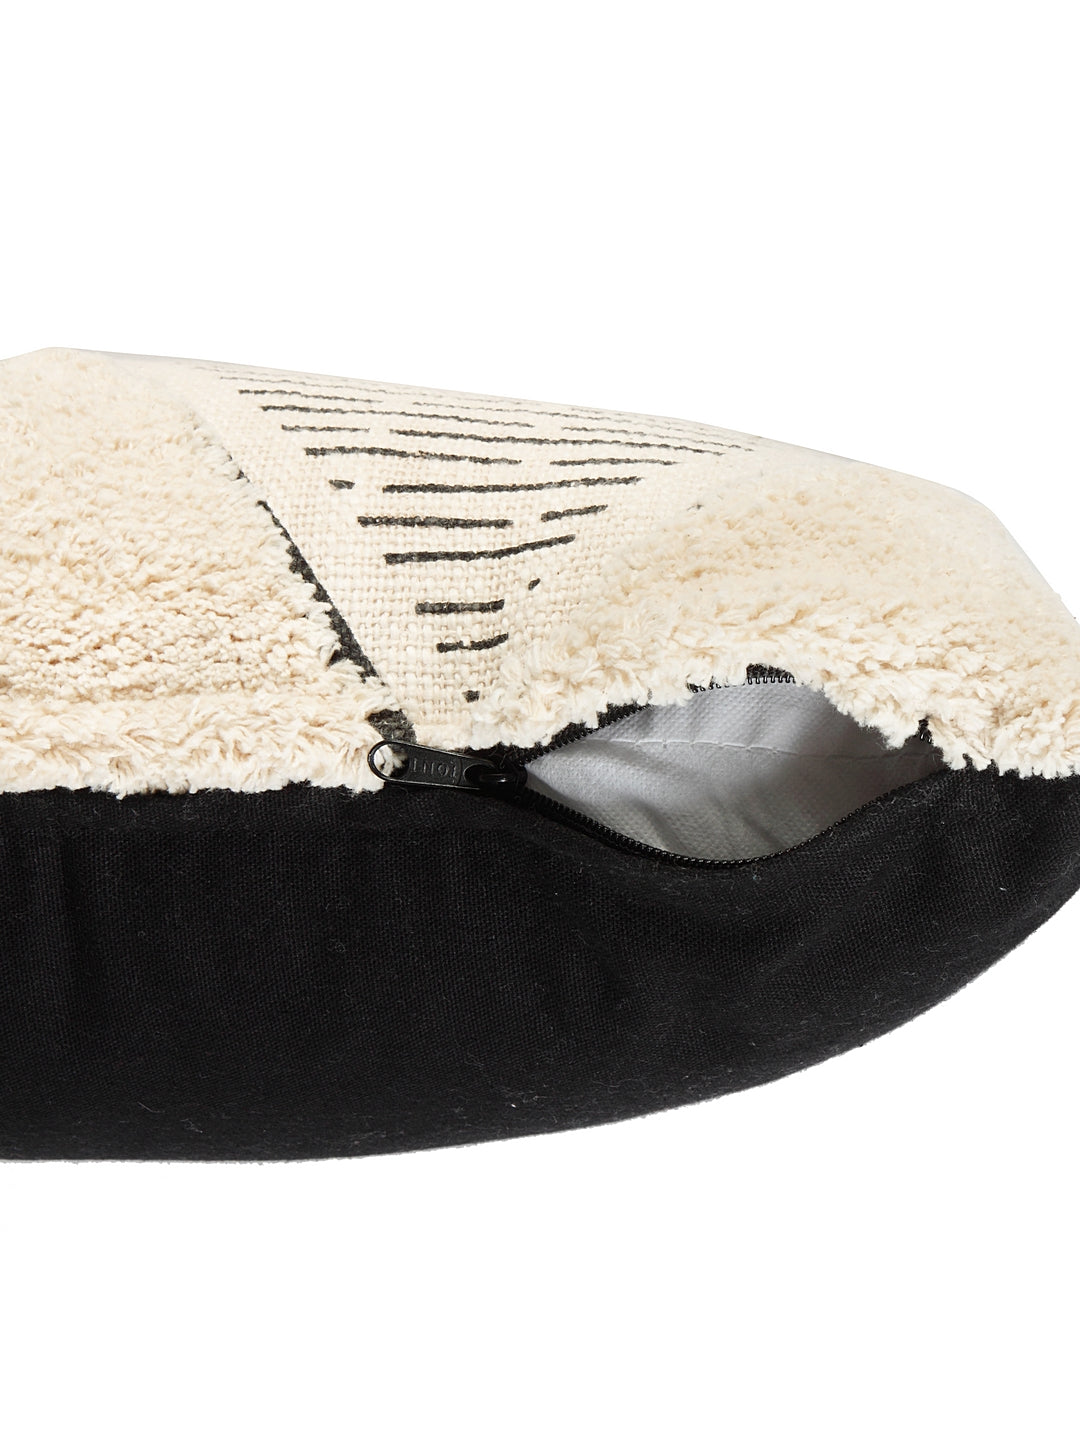 Black Diamond Tufted Cushion Cover with Filler 30x50cm